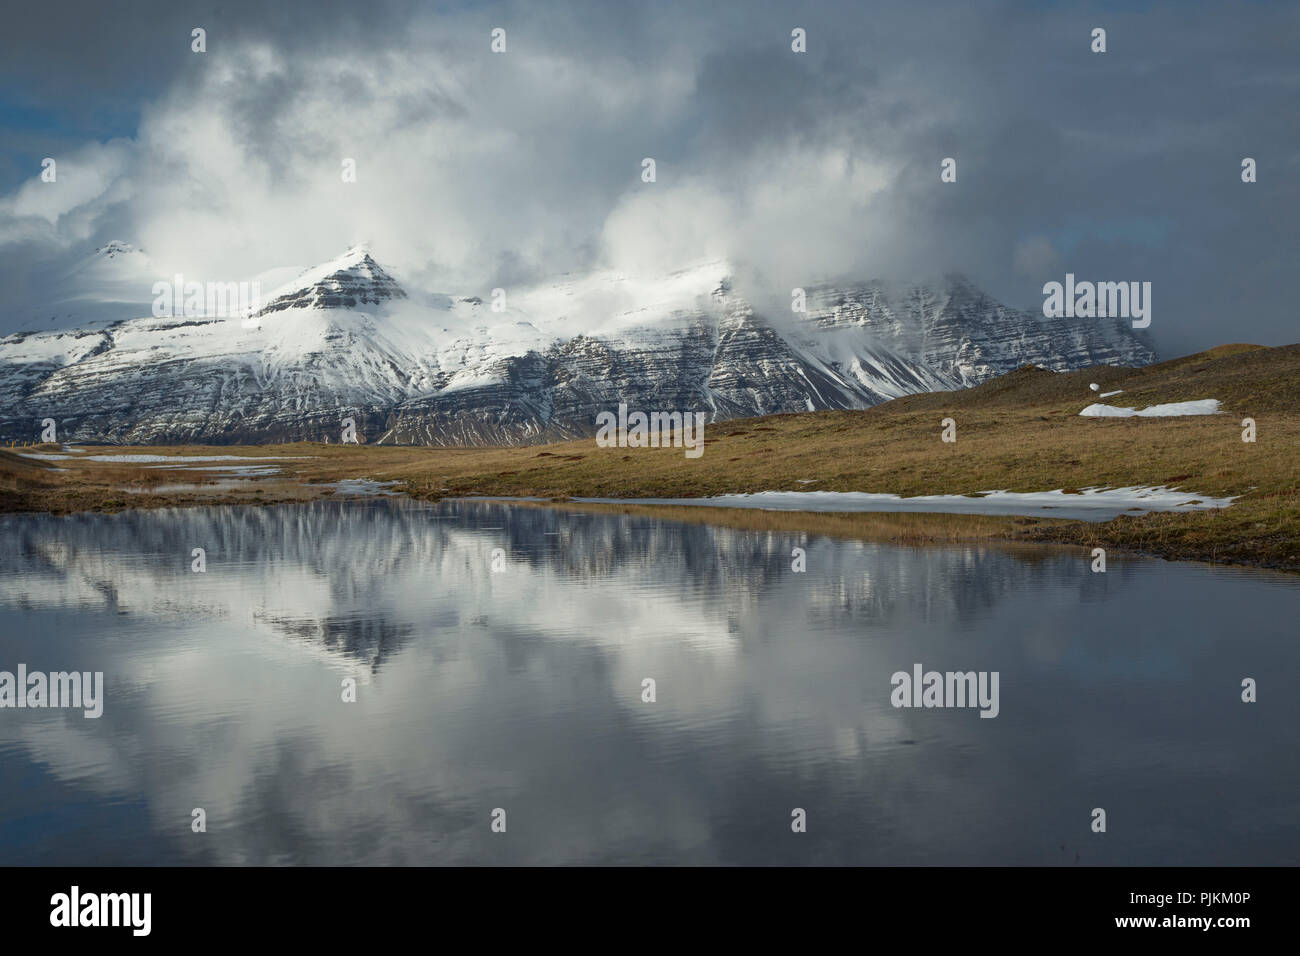 Iceland, lake, snowy mountains, wild cloud mood, reflection in the water, early spring Stock Photo